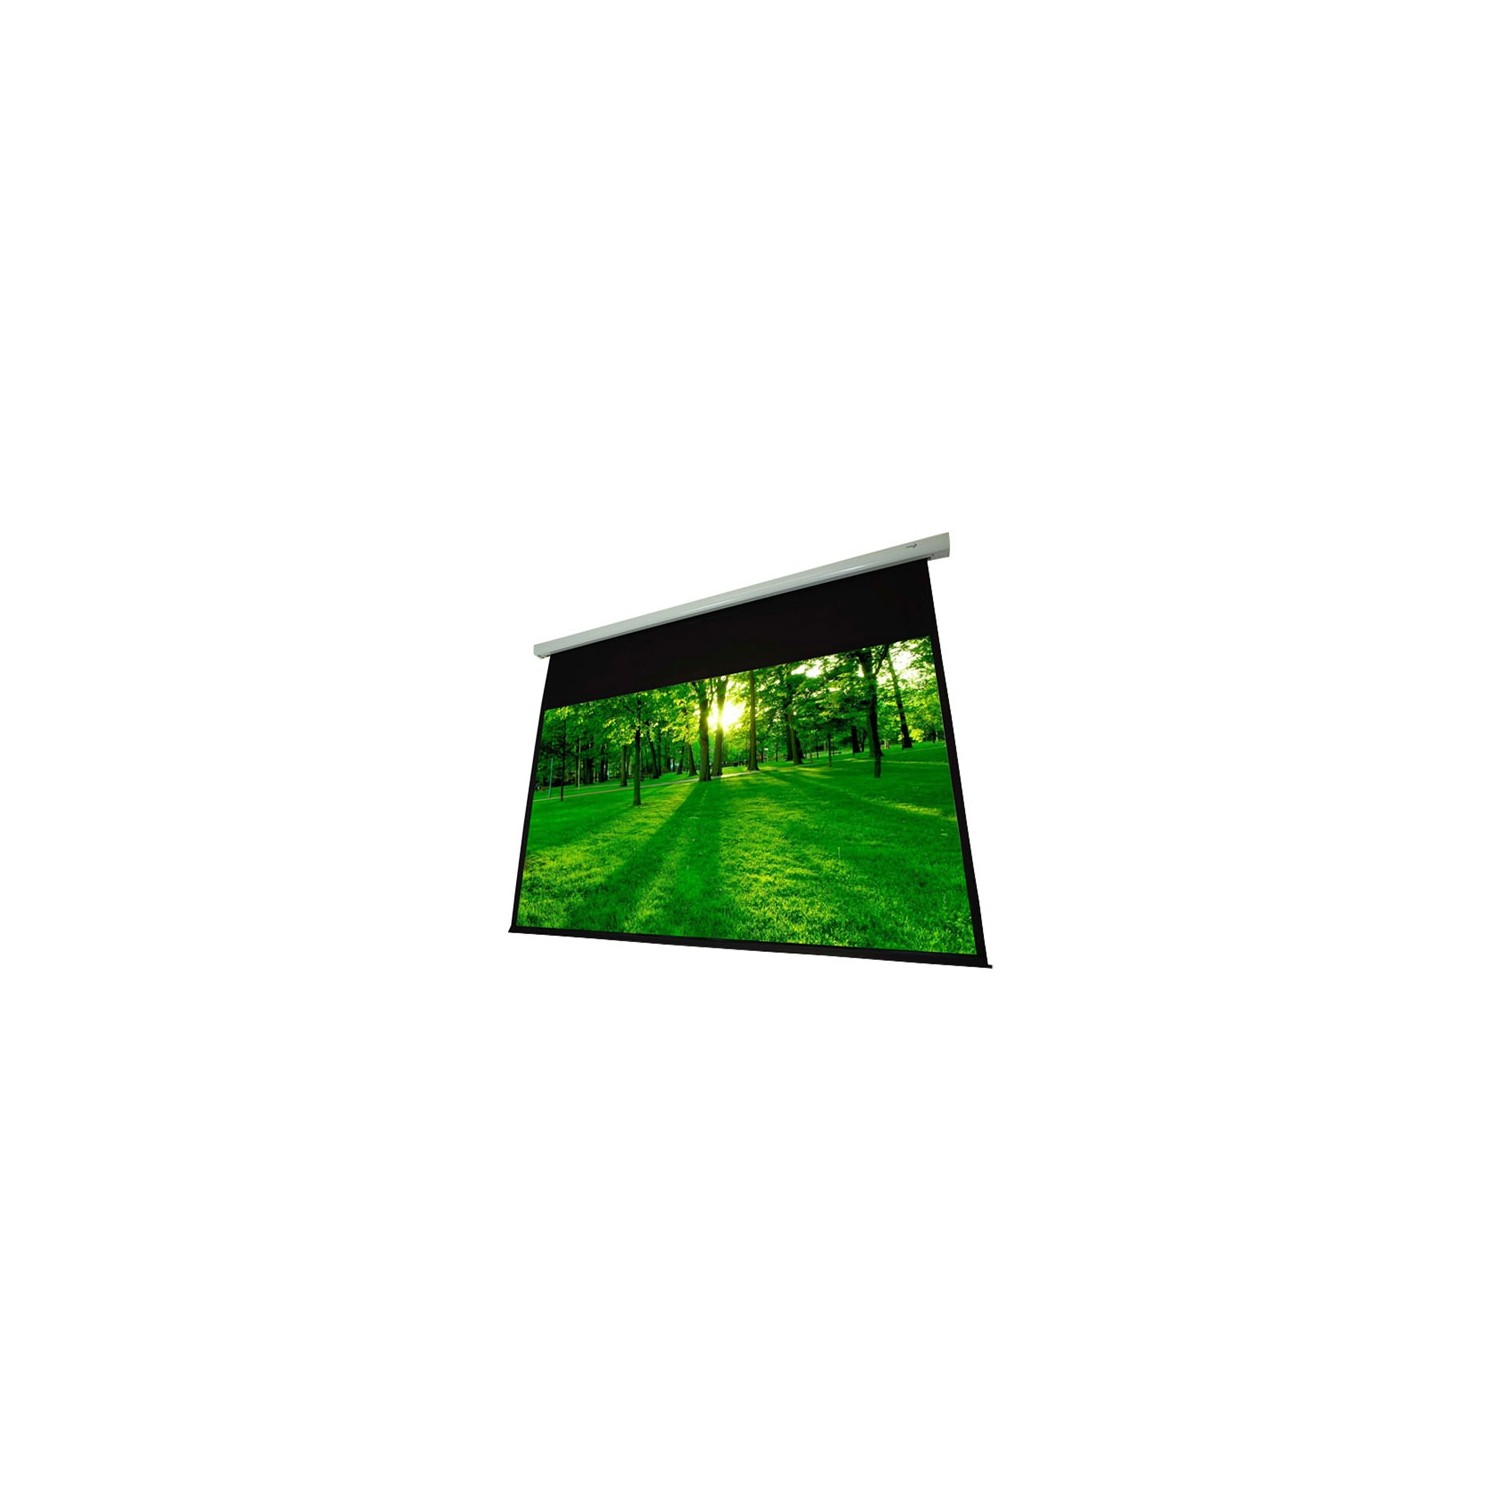 EluneVision Luna Series 120" 1.1 gainMotorized Projection Screen 